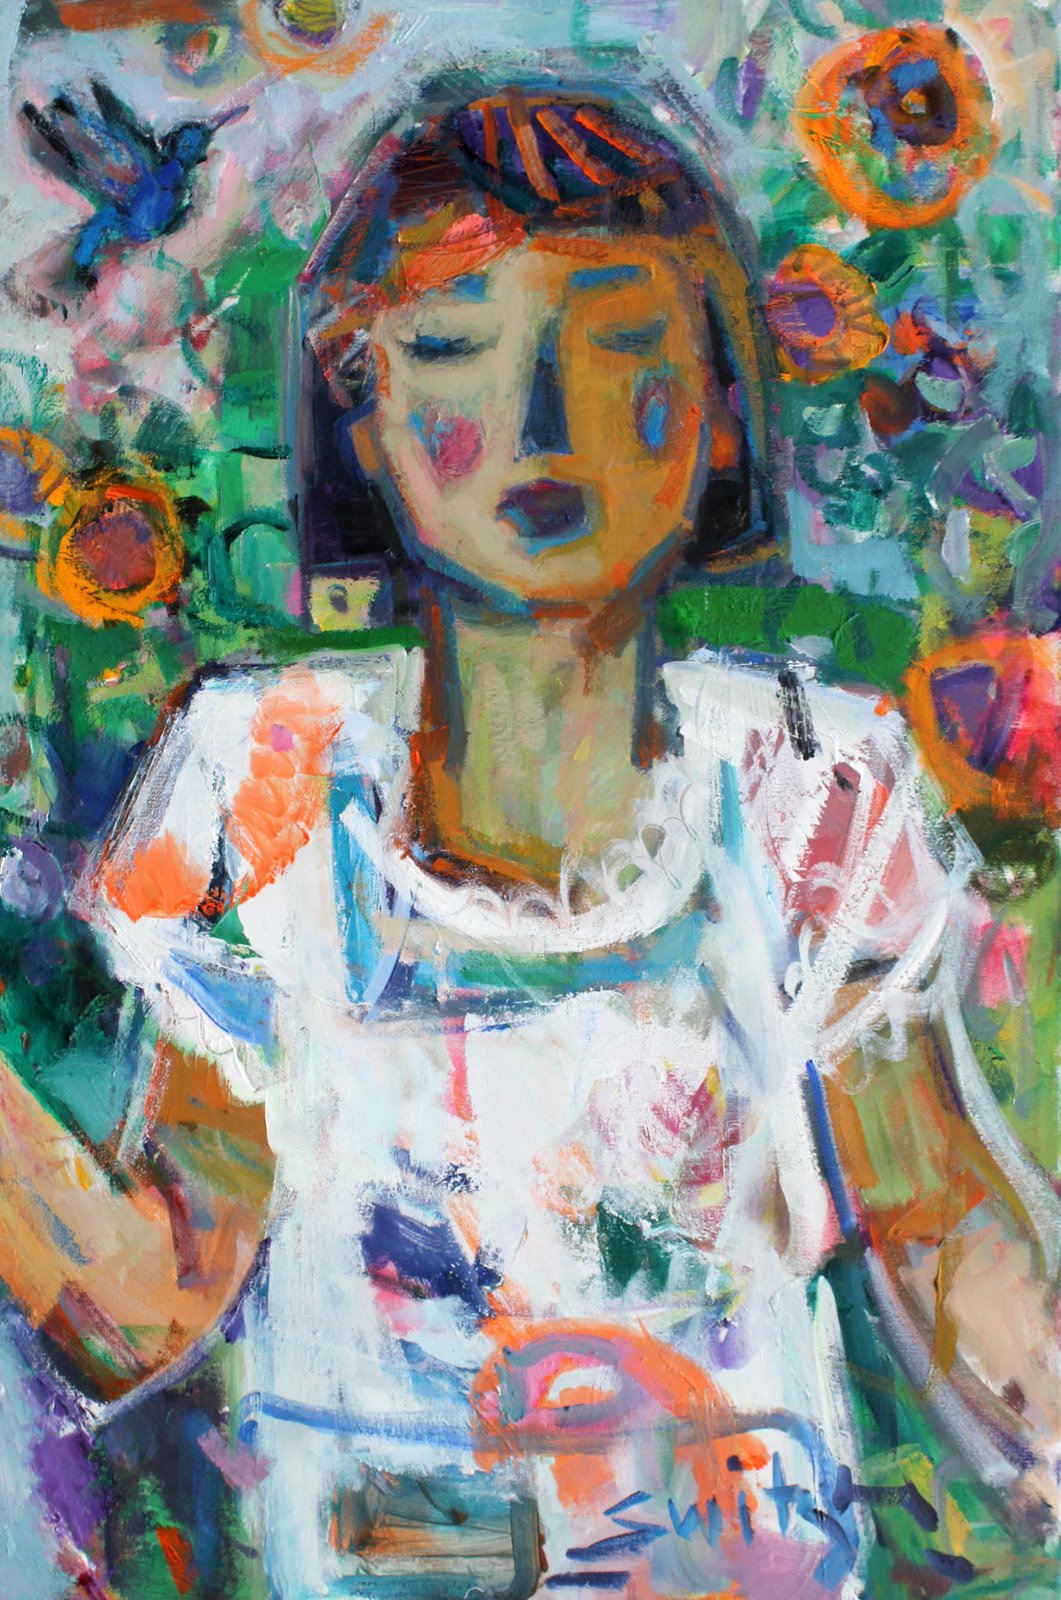  “Muse and Sunflowers”,                                                           36x24 inches,                                                                                  oil on canvas                                                            